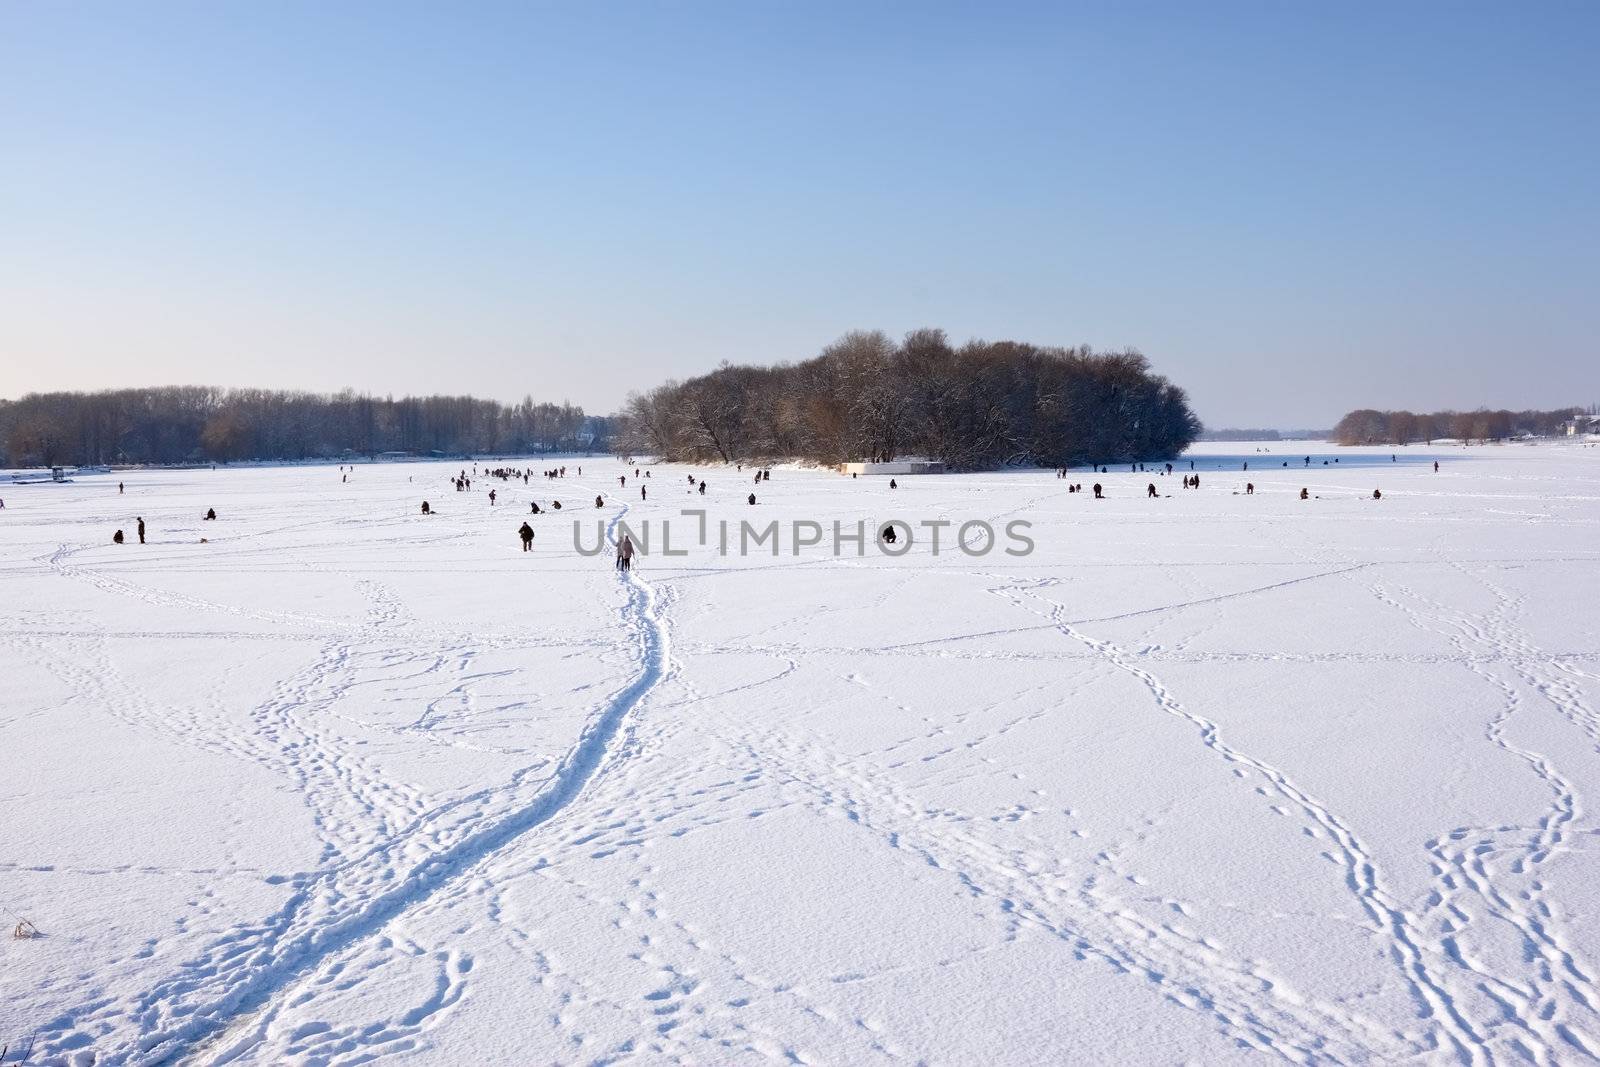 Winter scene. Fishermans catch fish in river on the ice surface with snow